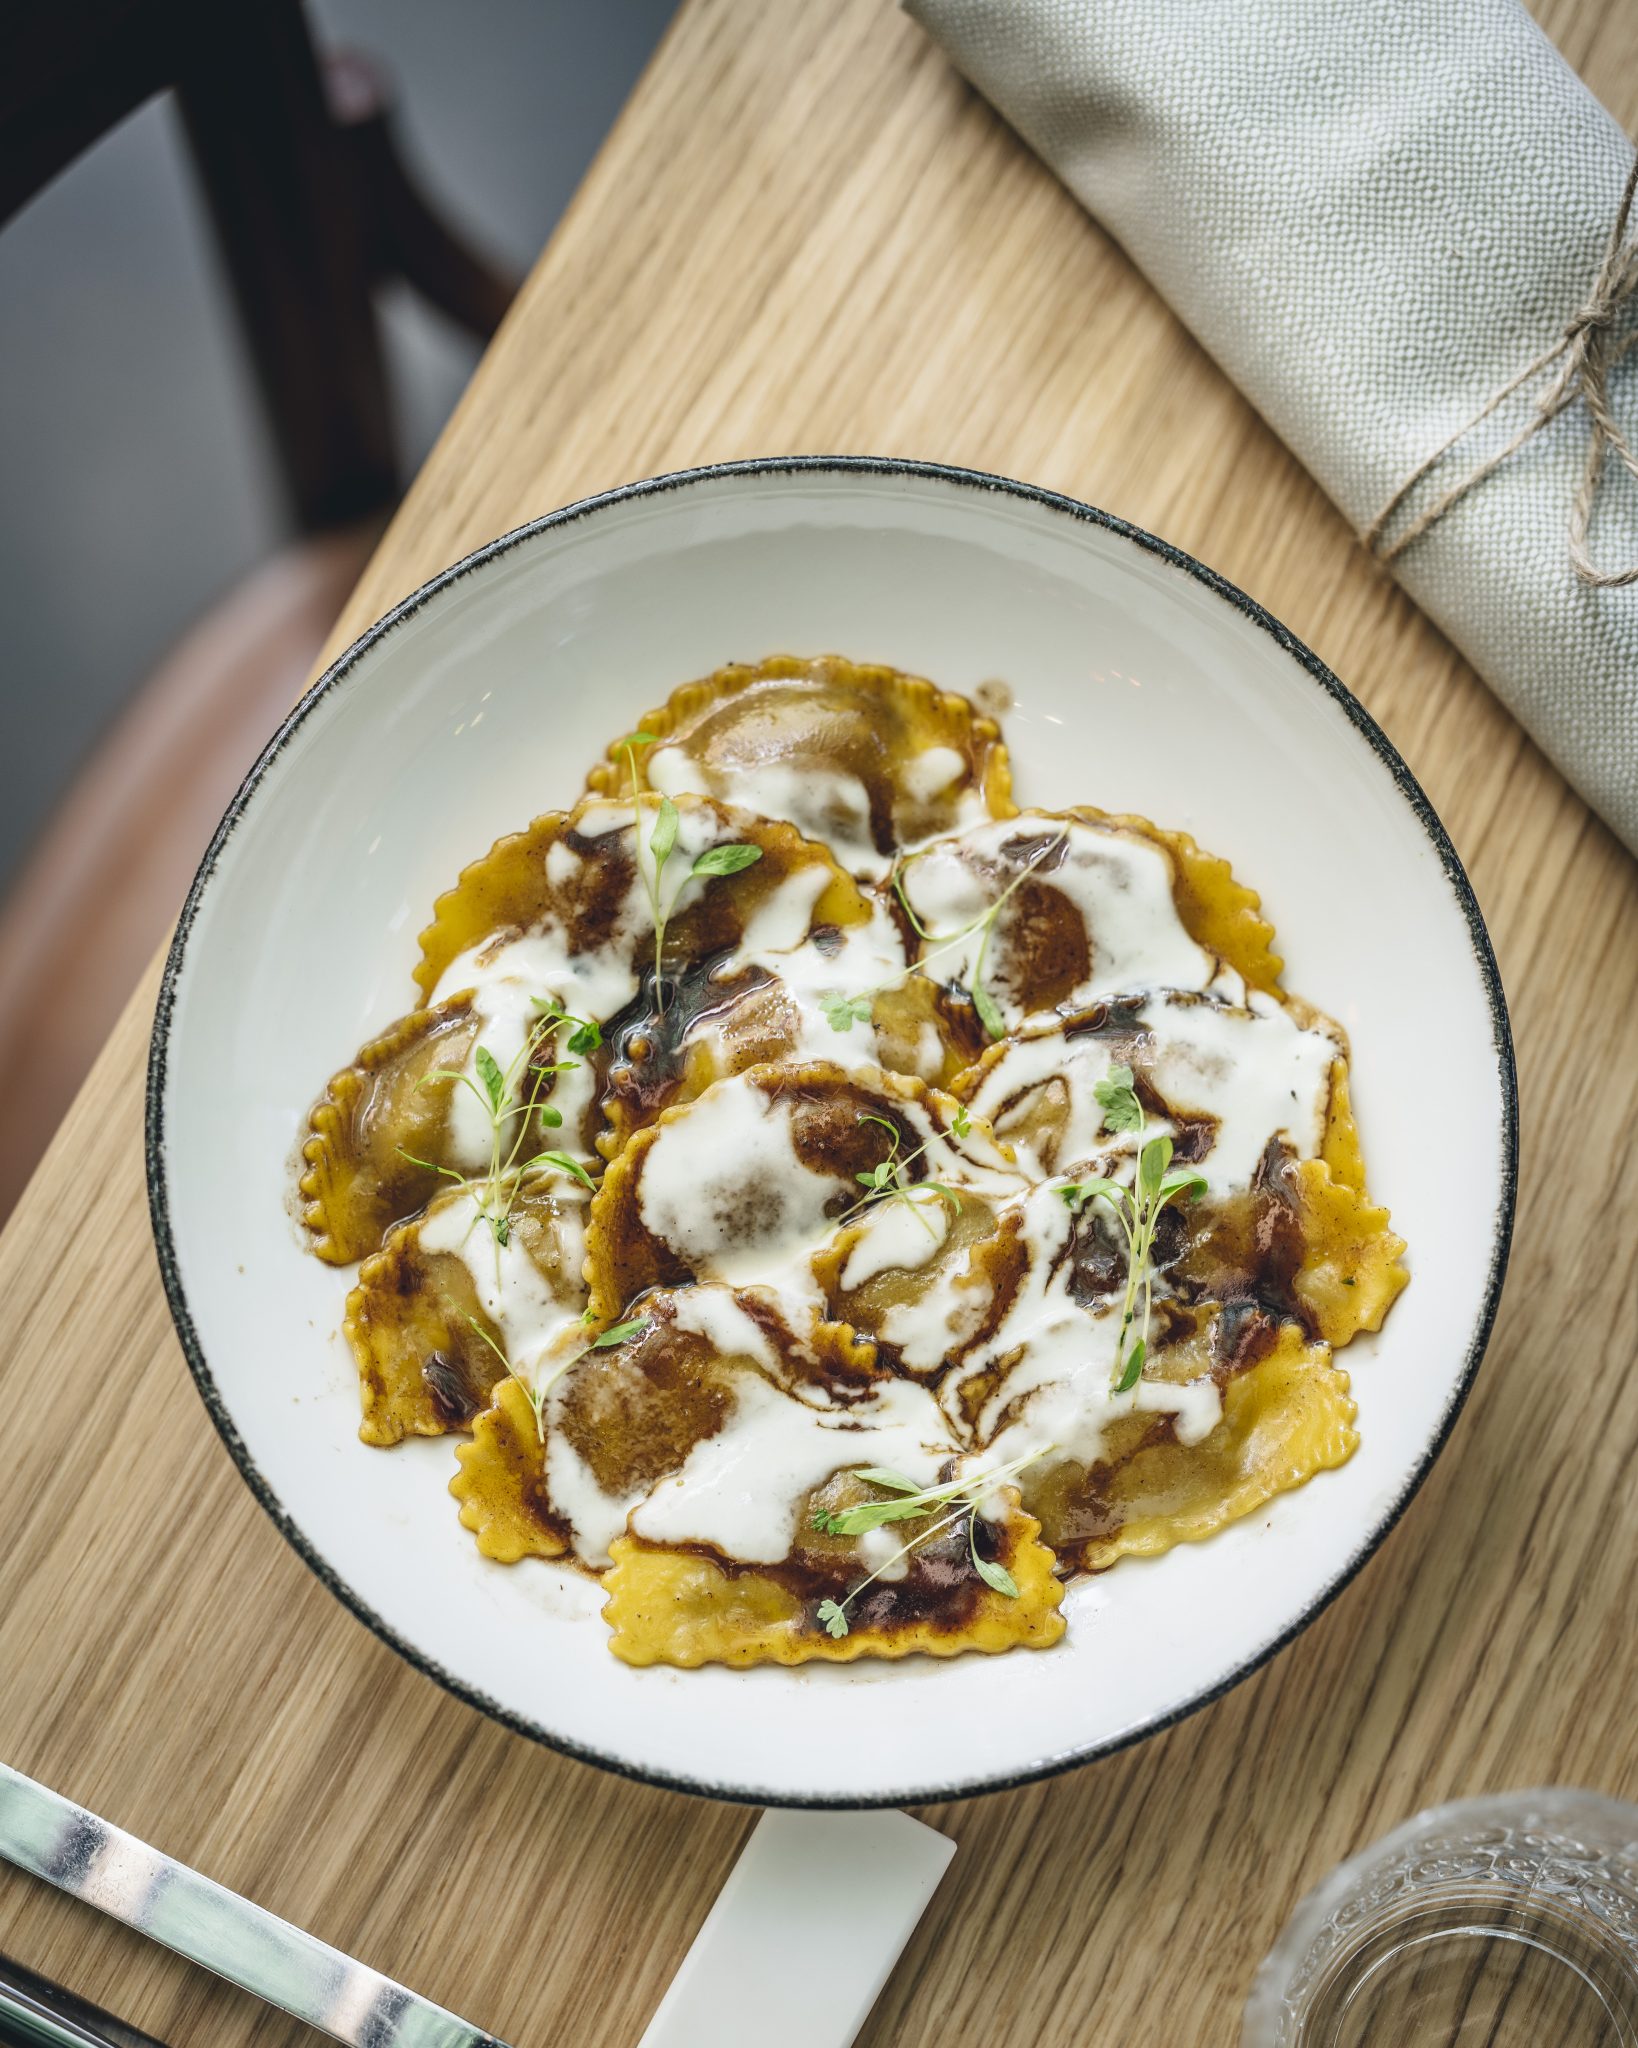 Terra Eataly London Review Slow braised oxtail ravioli | Photo: @lateef.photography